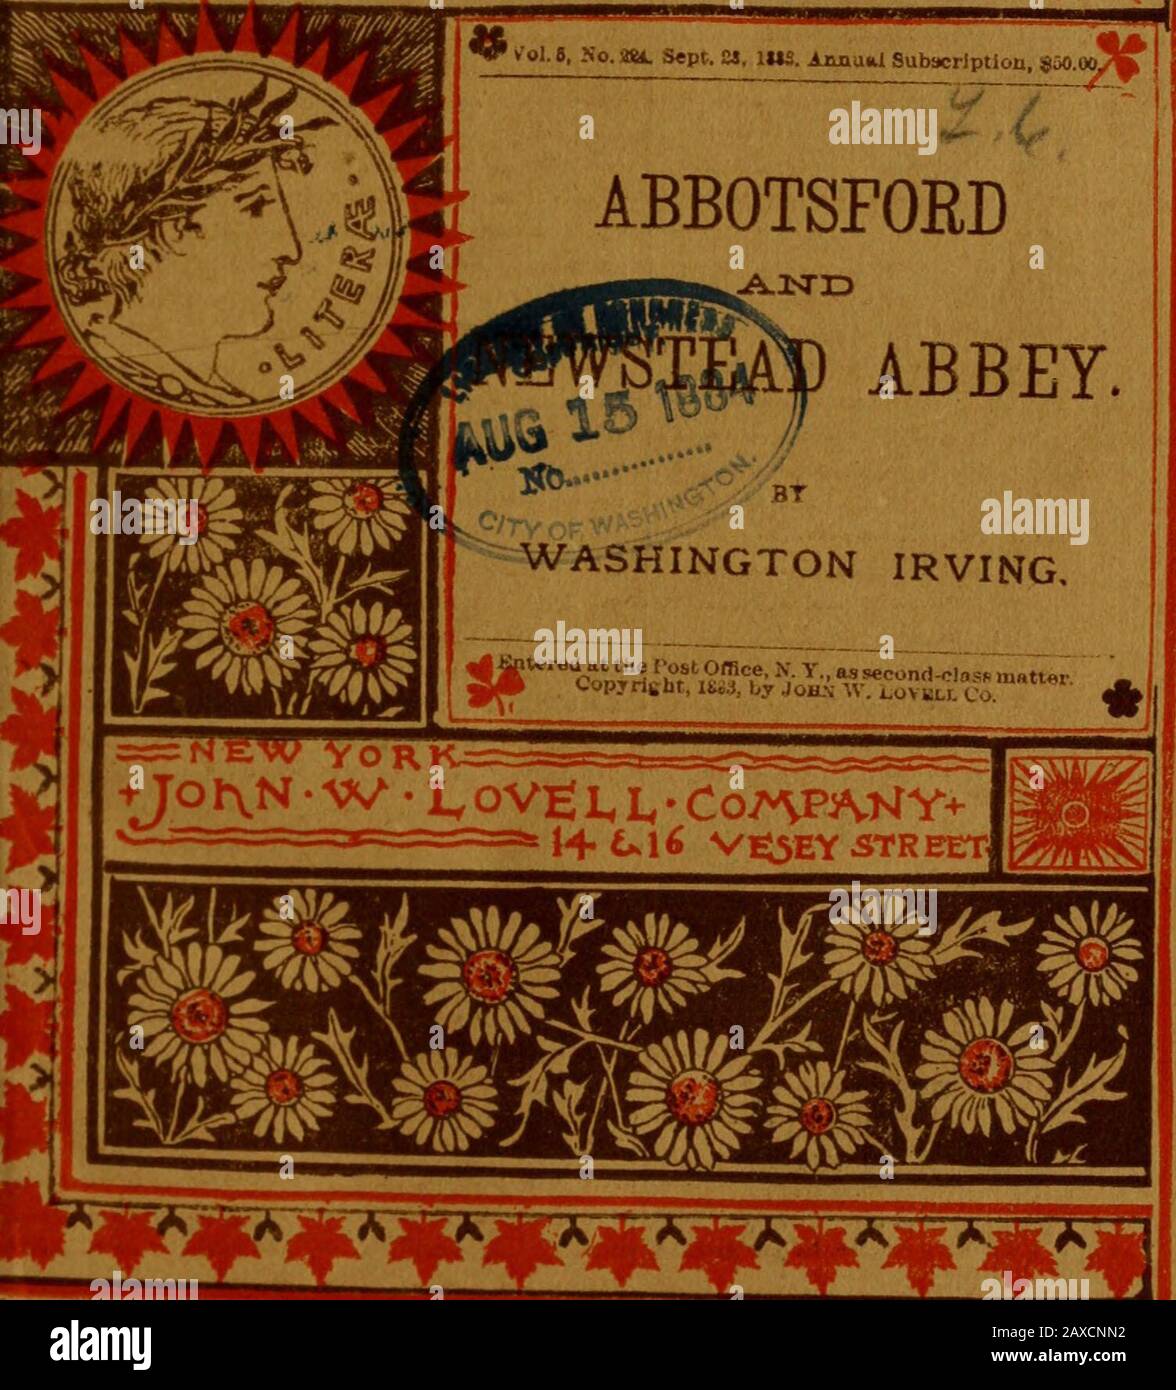 Abbotsford and Newstead abbey . o V ?&gt; vote* * xXV ^ ^IPv «*** 8 I  LIBRARY OF CONGRESS D002SHfc3bHA. W*+W*&gt;±A&ip*^M iwrt «fcQTM »1 jn&gt;tKff frr »:» v^jmm „(, ta 4^»iM4 f&gt;«* «kv MkMRw »/? mwmImIw, pdct 1M», LOVELLS LIBRARY-CATALOGUE. l. 3.3.4. 5. 6. 7. 8. 9.10.11.12.13.14.15.16.17.18. 19.20.21.2223!24.25.26.27.28.29.30.31.32. 33.34. 35.36.37.38.39.40. 41.42.43.44. 45. 46.47.48.49.50. Hyperion, by H. W, Longfellow. .20Outre-Mer, by H. W. Longfellow.20 The Happy Boy, by BjOrnson 10 Arne, by Bjornson 10 Frankenstein, by Mrs. Shelley... 10 The Last of the Mohicans 20 Clytie, by Josep Stock Photo